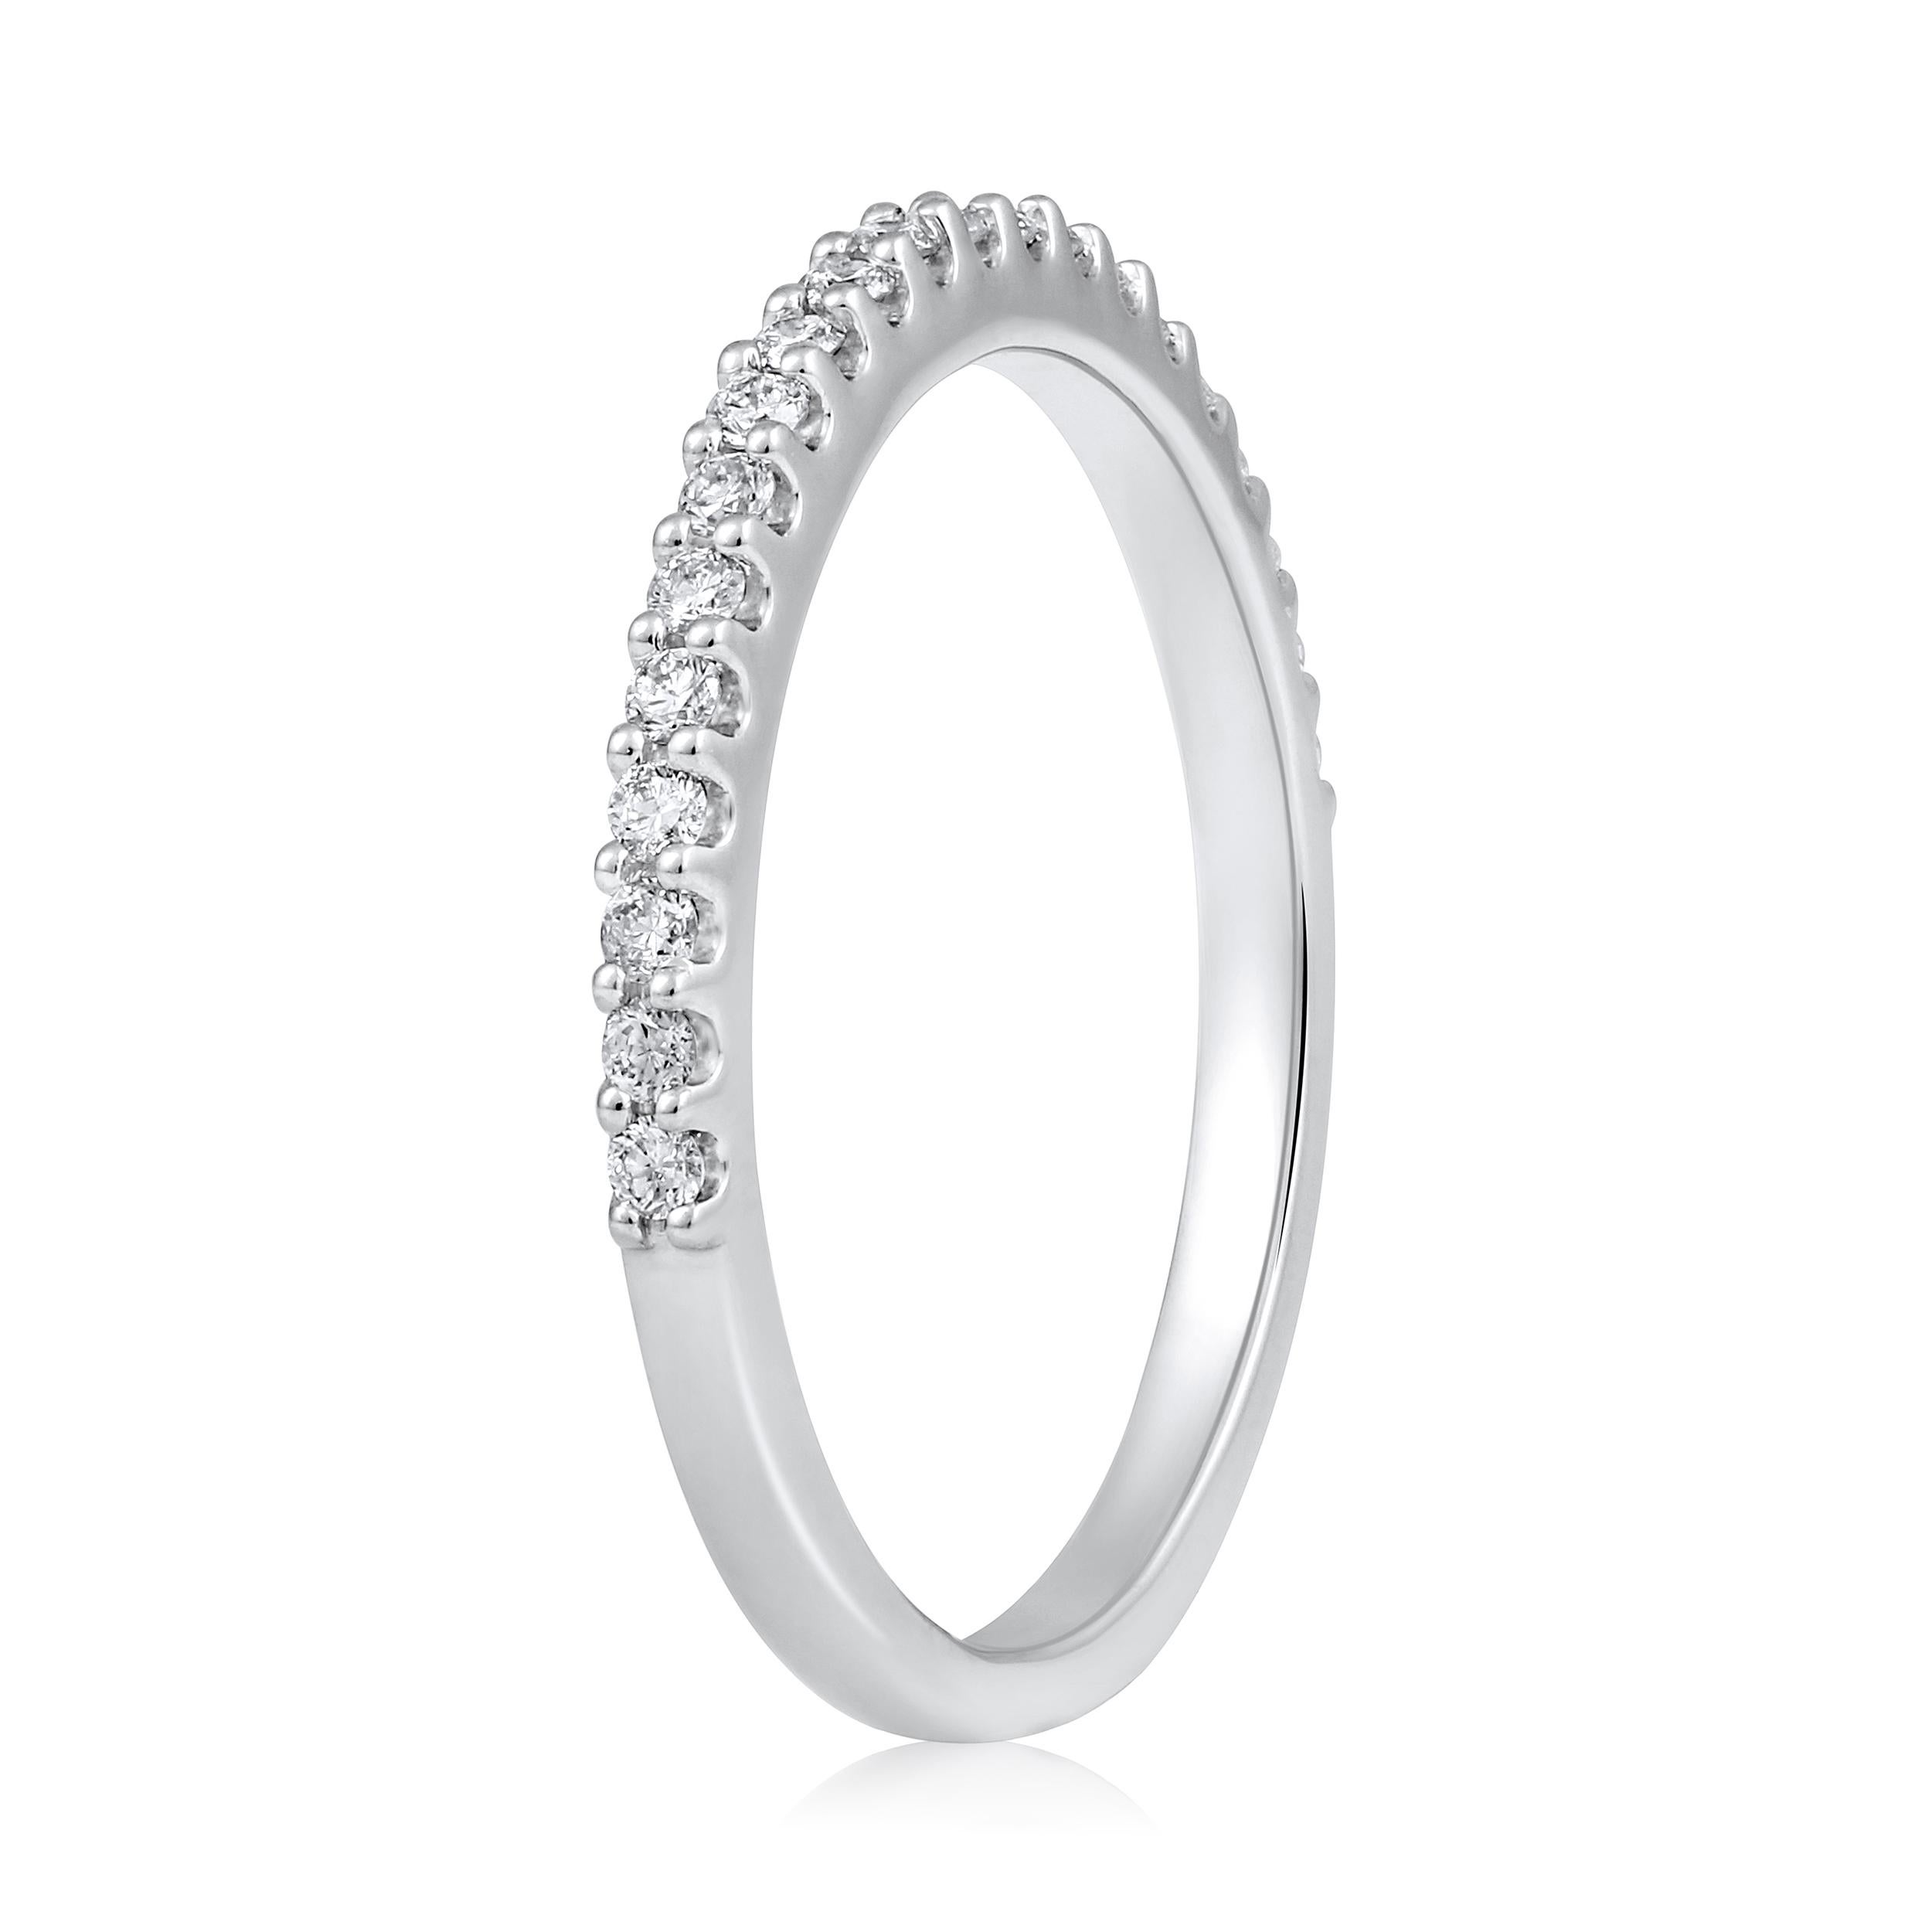 Ring Size: US 8 

Crafted in 2 grams of 14K White Gold, the ring contains 21 stones of Round Diamonds with a total of 0.26 carat in G-H color and SI clarity.

CONTEMPORARY AND TIMELESS ESSENCE: Crafted in 14-karat/18-karat with 100% natural diamond